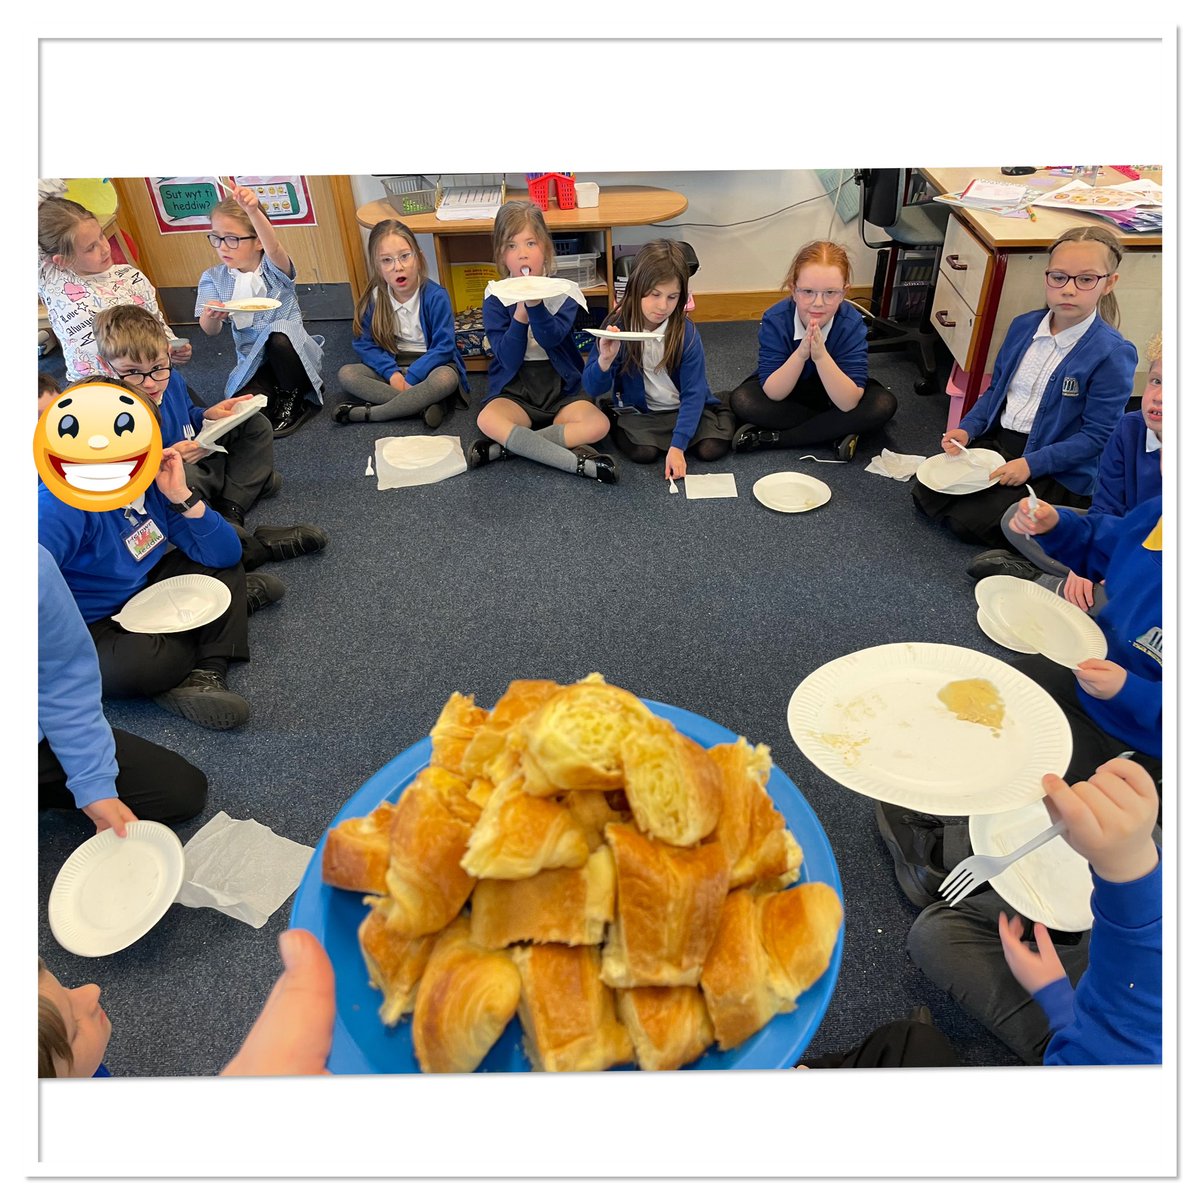 Today we have done a food test and tasted 8 different foods from other countries around the world- Italy, Greece, Morocco, Japan, Australia, France, Turkey and Spain! @YsgolMaesglas